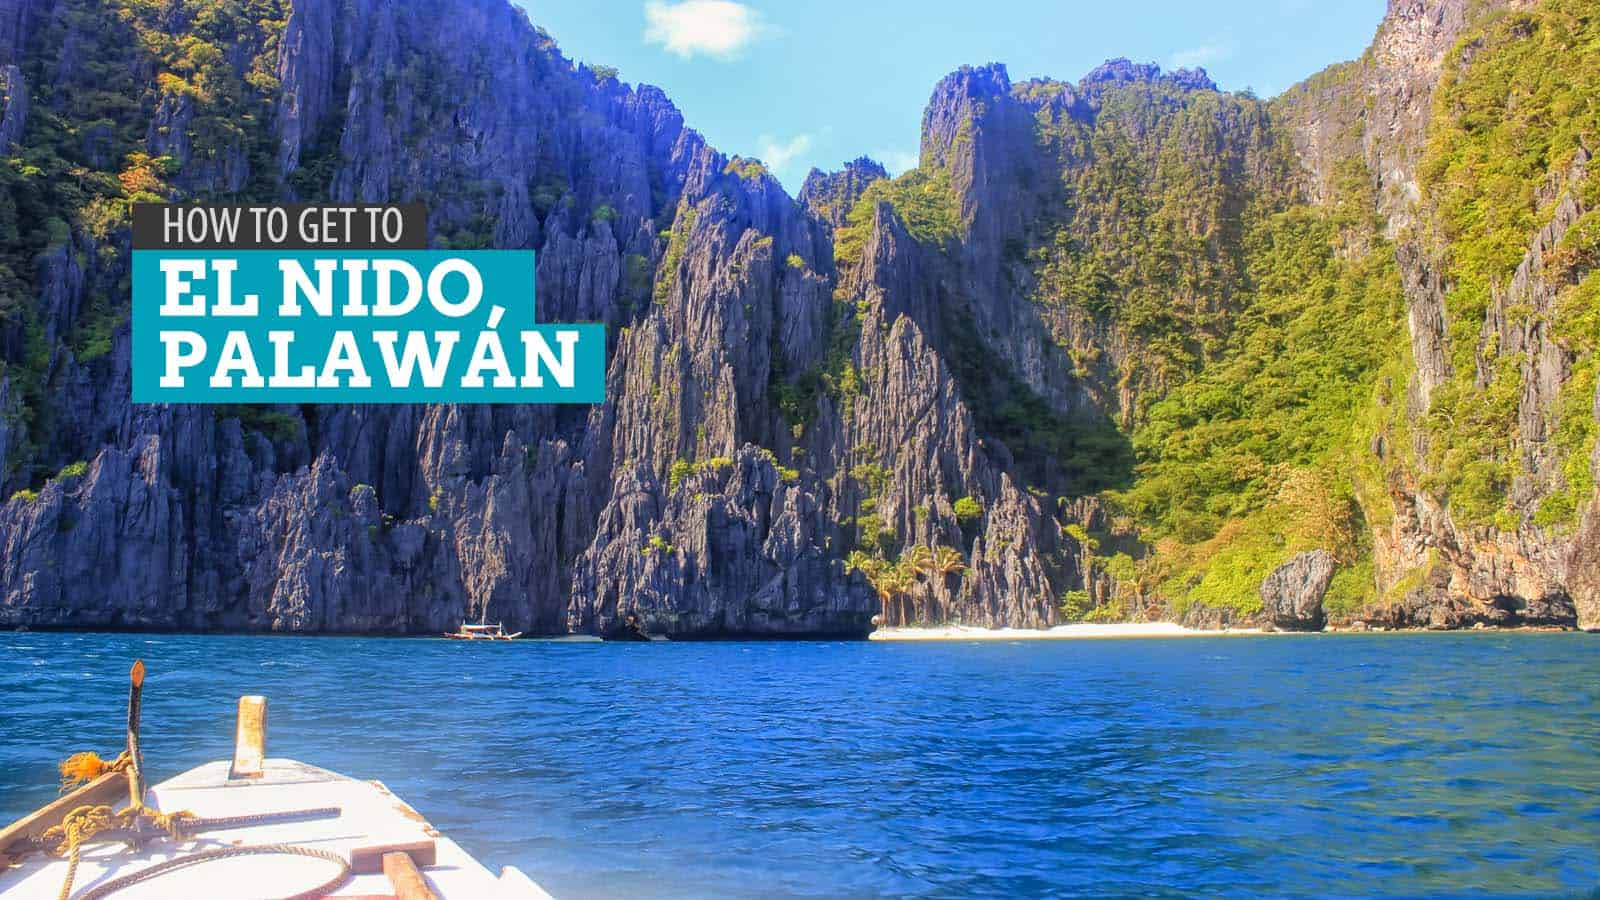 How to Get from PUERTO PRINCESA TO EL NIDO: By Bus and Van | The Poor Traveler Blog